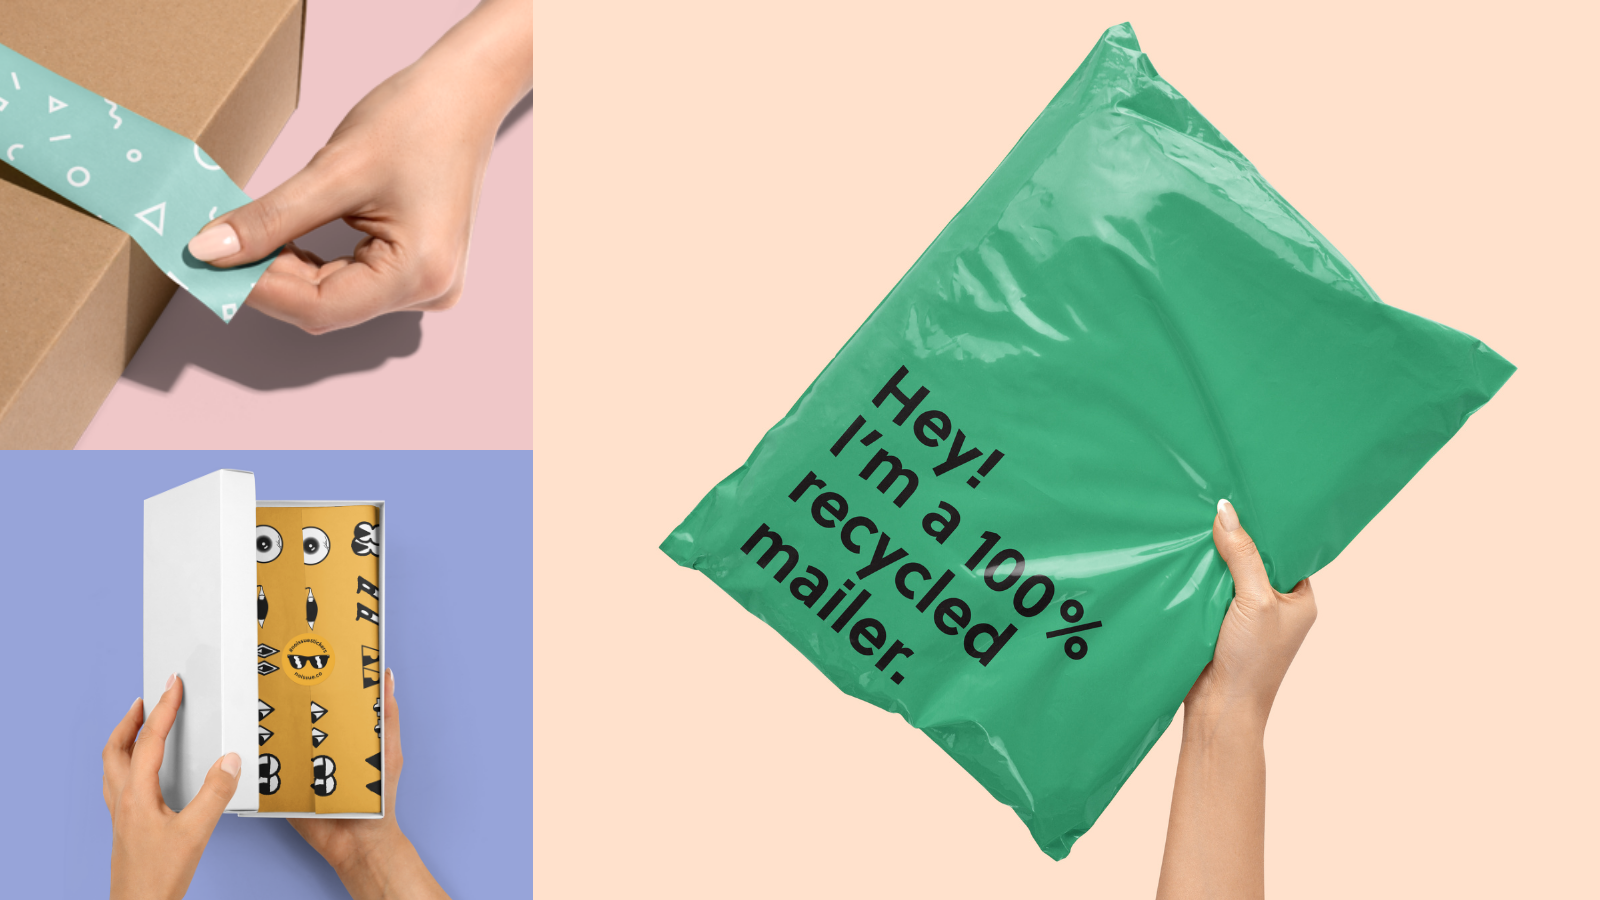 Sustainable packaging is a major trend for ecommerce brands in 2023. 